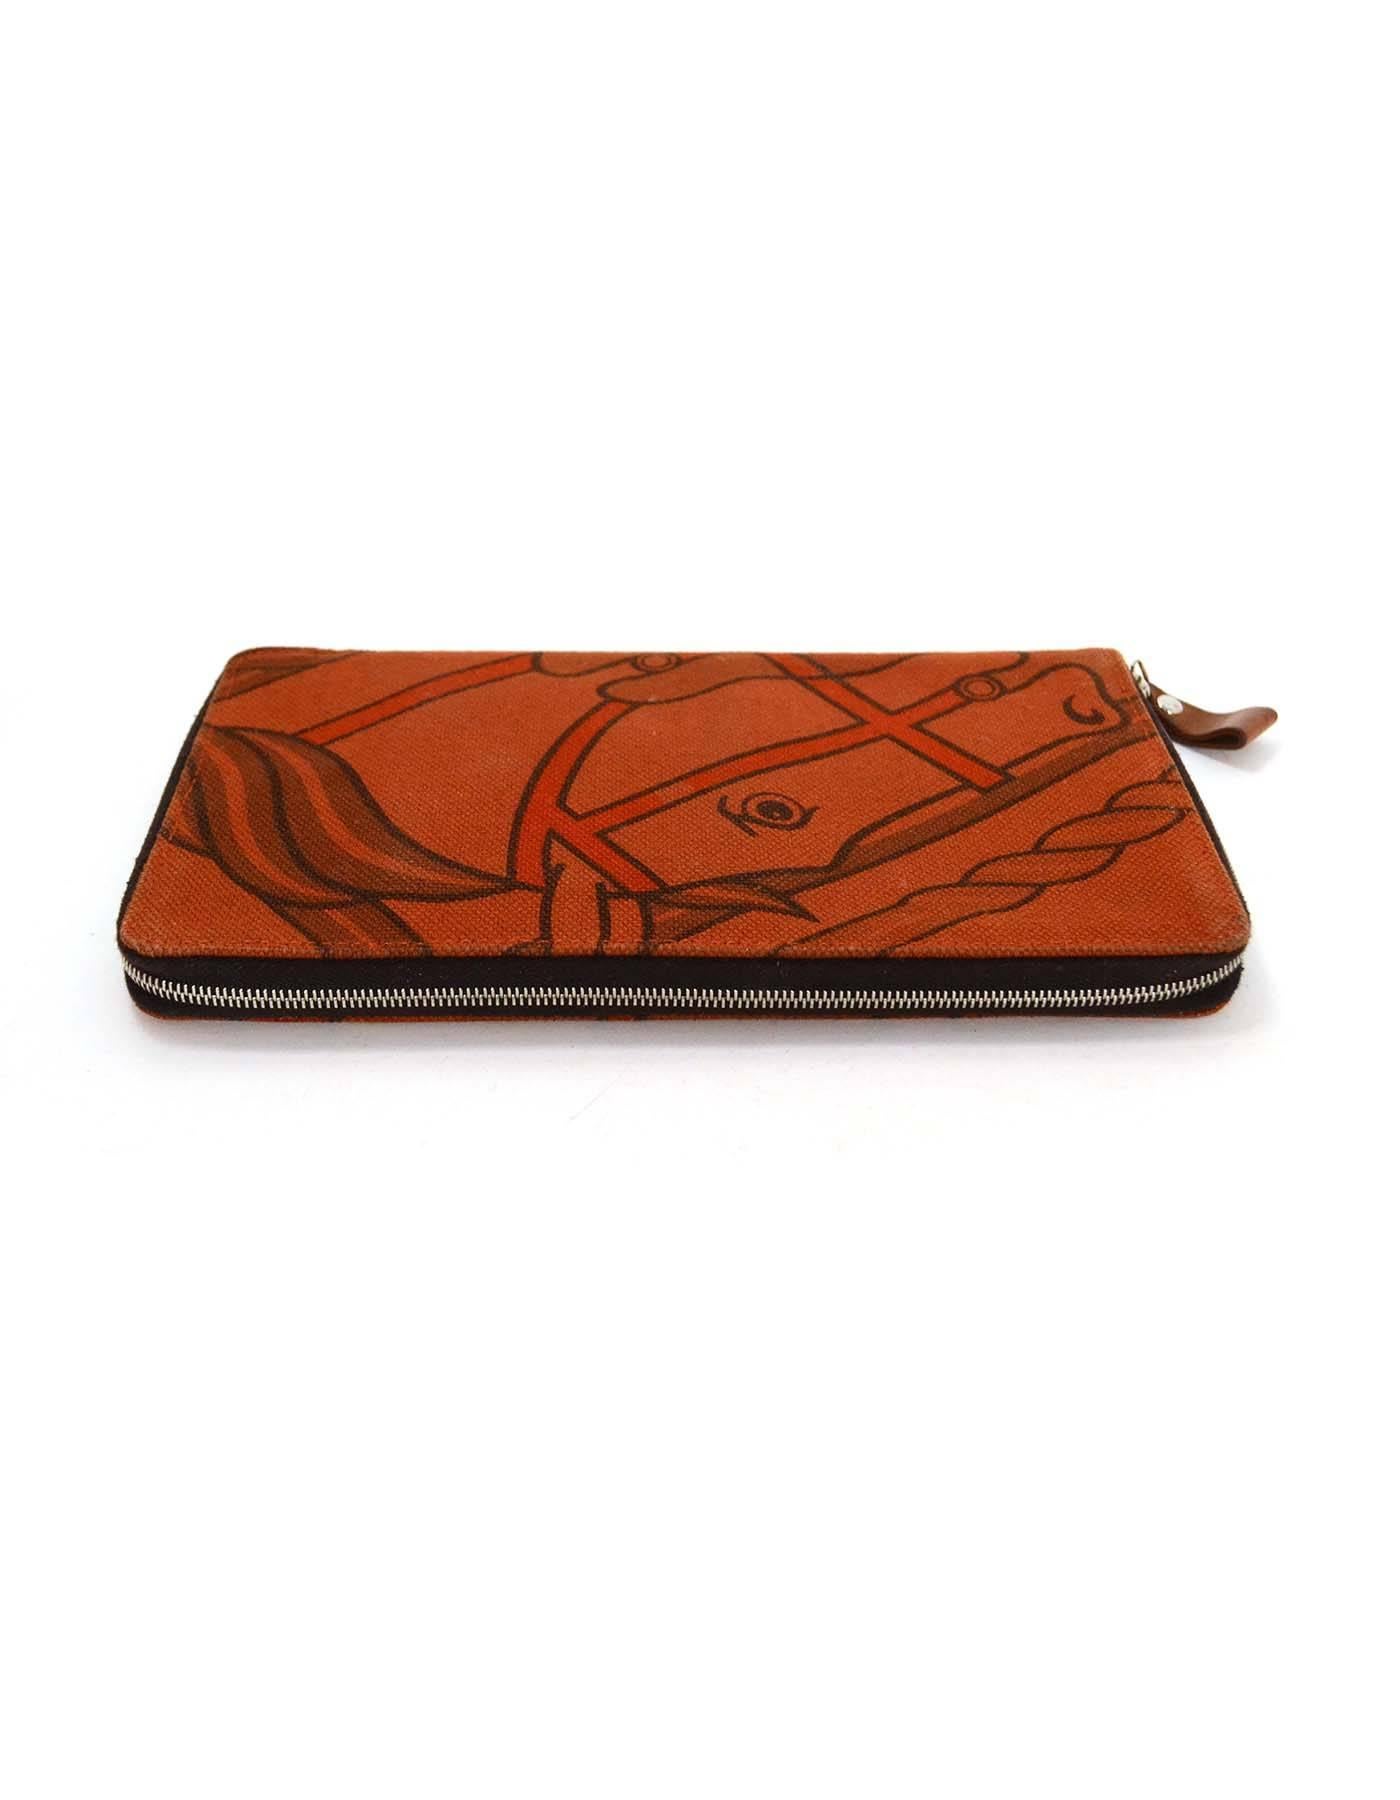 Hermes Horse Print Canvas Oversize Wallet

Made in: France
Year of Production: 2012
Color: Burnt orange and brown
Materials: Canvas
Hardware: Silvertone
Lining: Brown textile
Exterior Pockets: None
Interior Pockets: Ten card slots, three